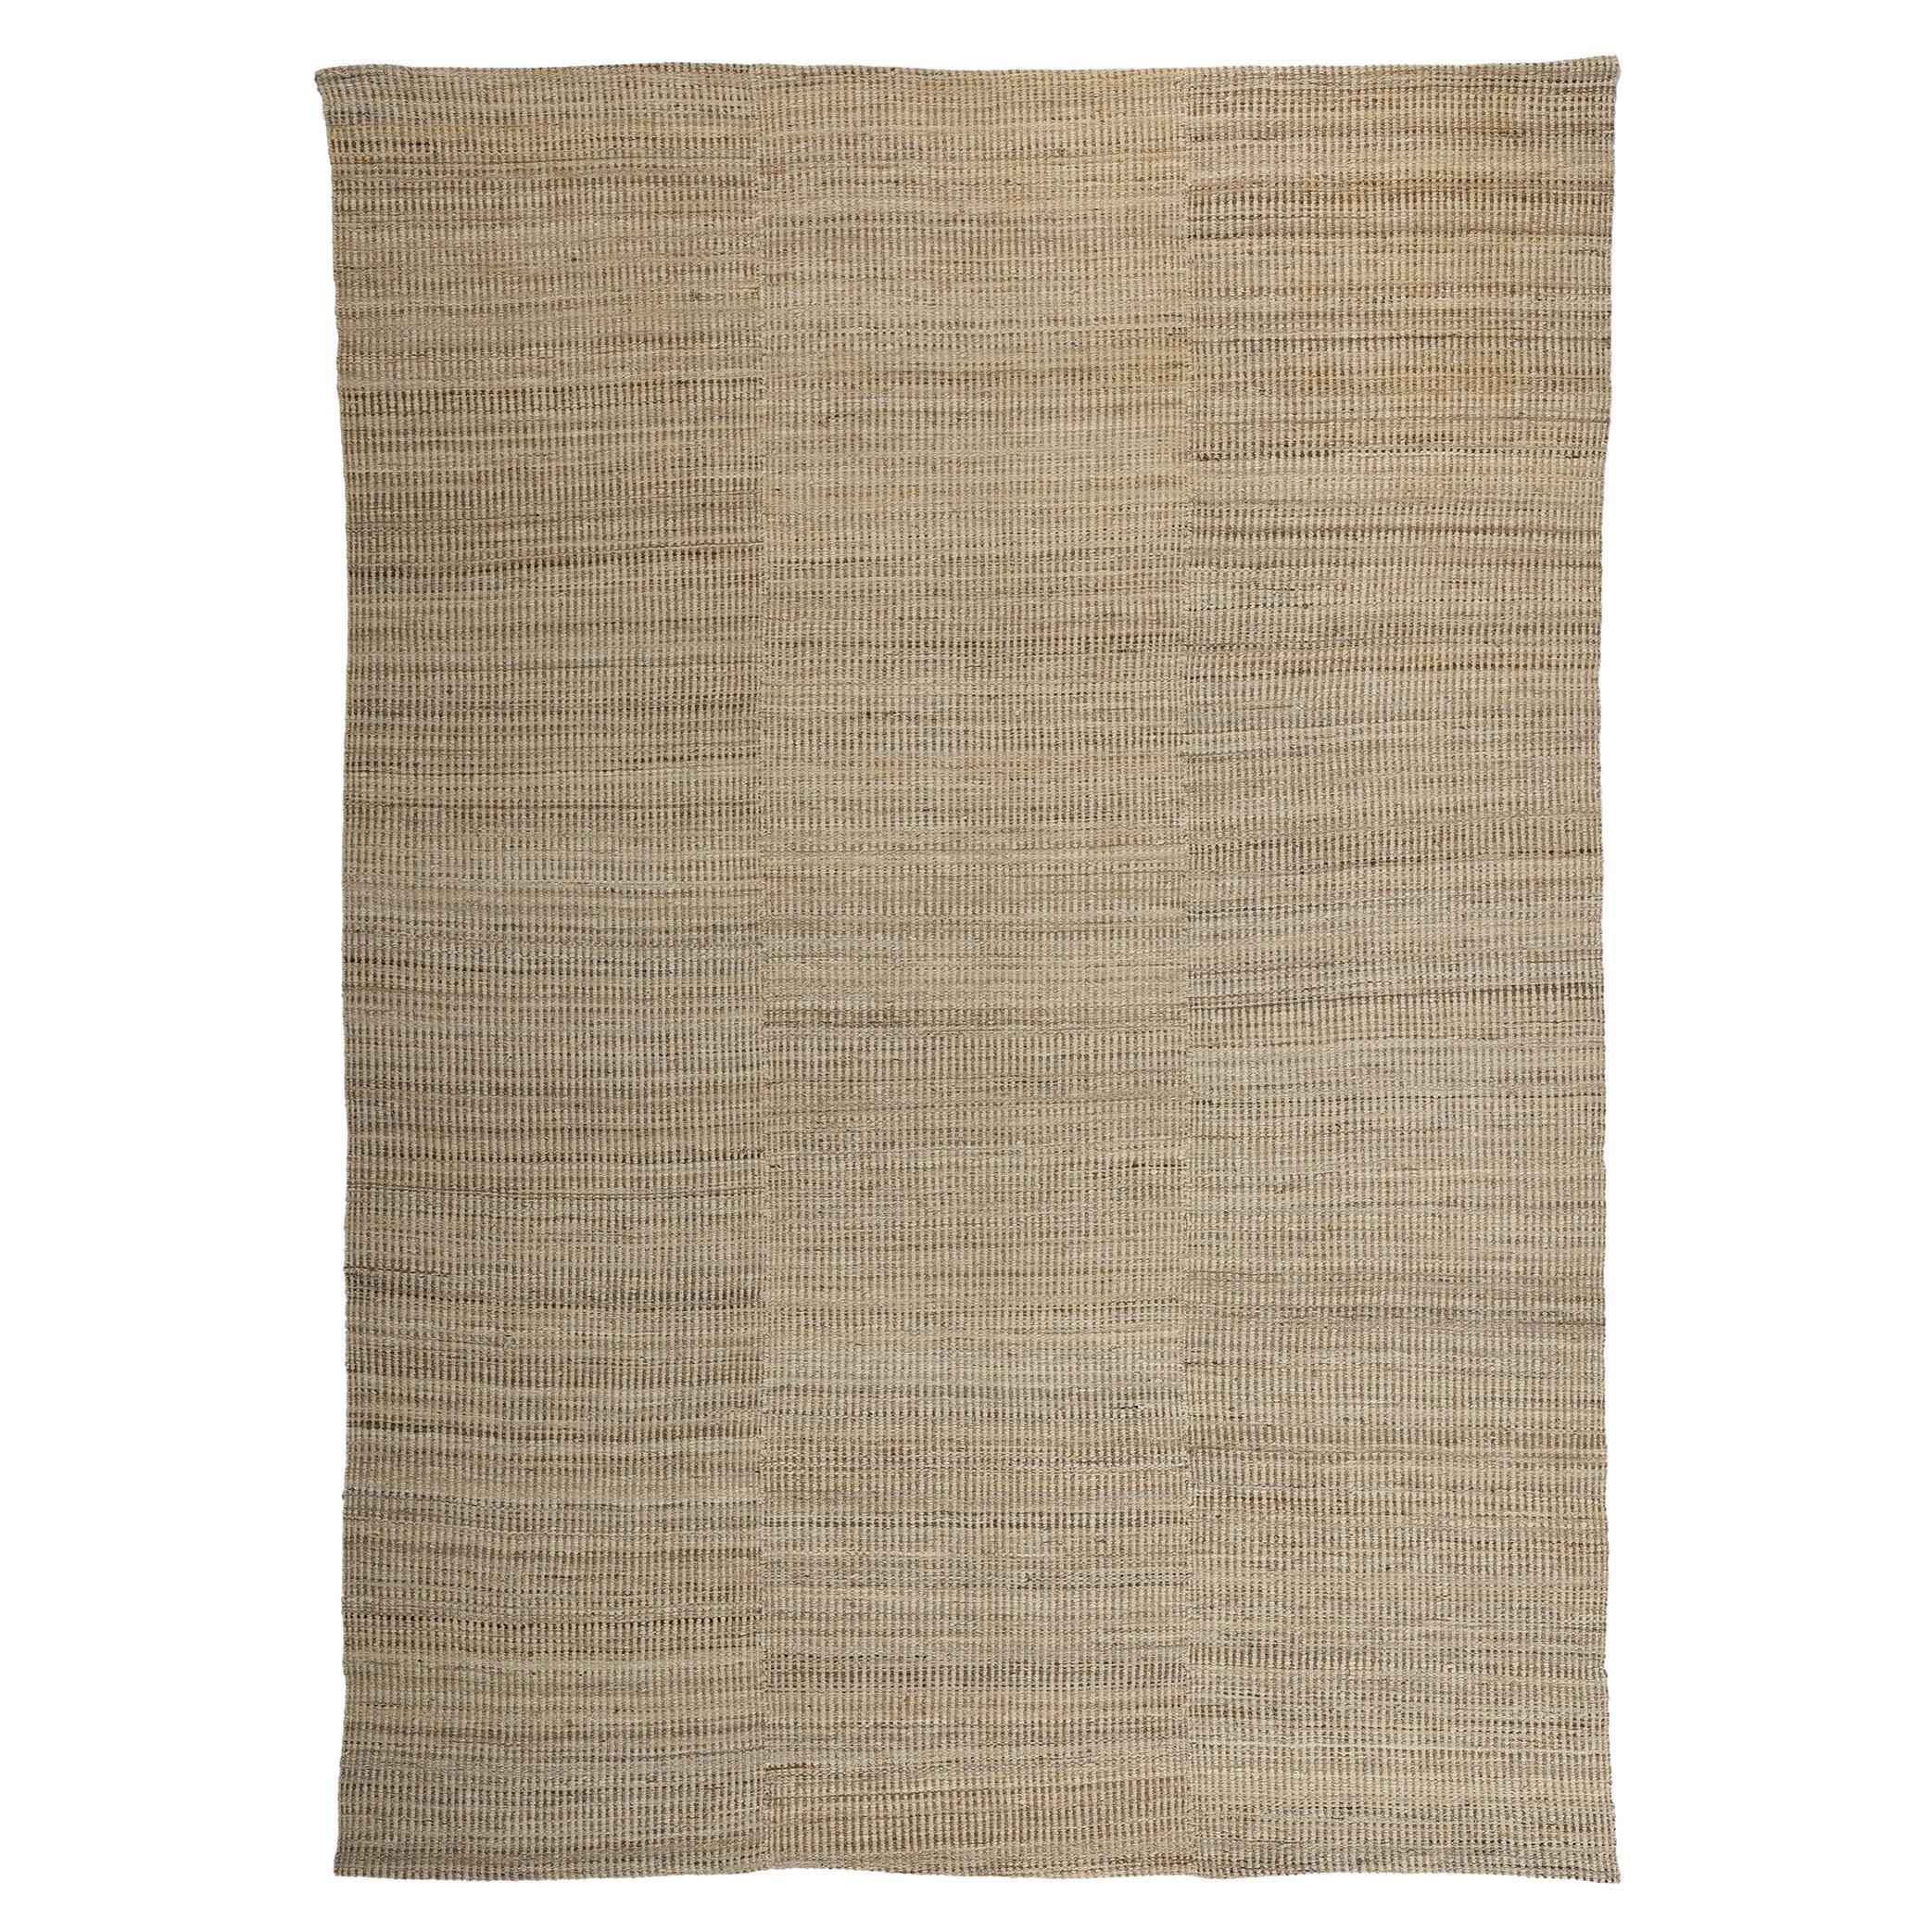 Earth-Tone Japandi Kilim Area Rug, Modern Serenity Meets Zen Tranquility For Sale